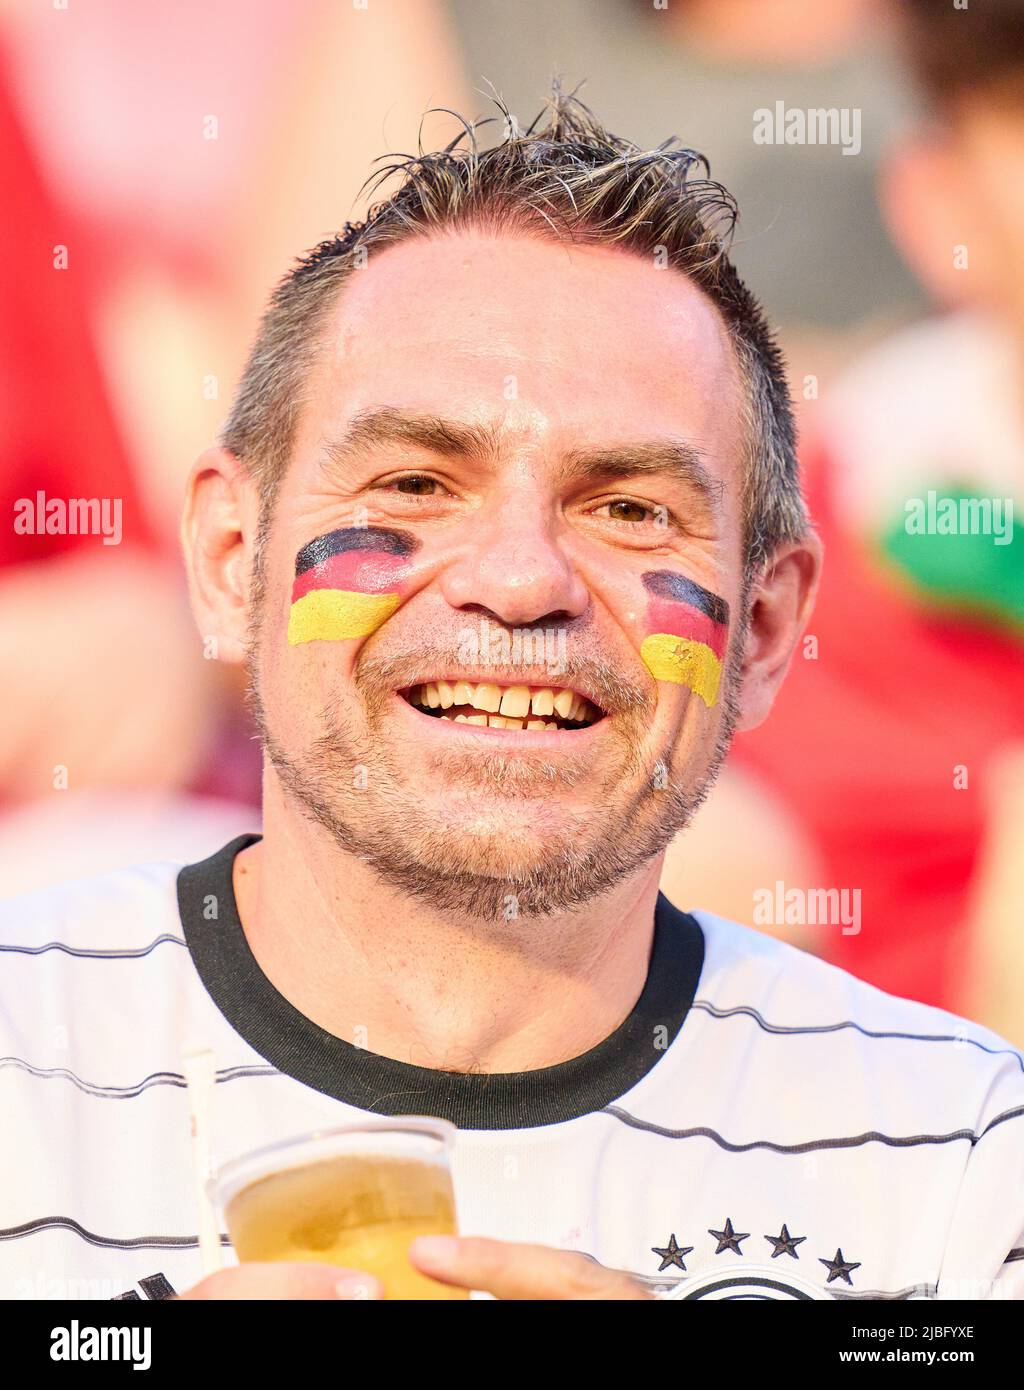 DFB and ITA fans in the UEFA Nations League 2022 match ITALY - GERMANY 1-1  in Season 2022/2023 on Juni 04, 2022  in Bologna, Italy.  © Peter Schatz / Alamy Live News Stock Photo